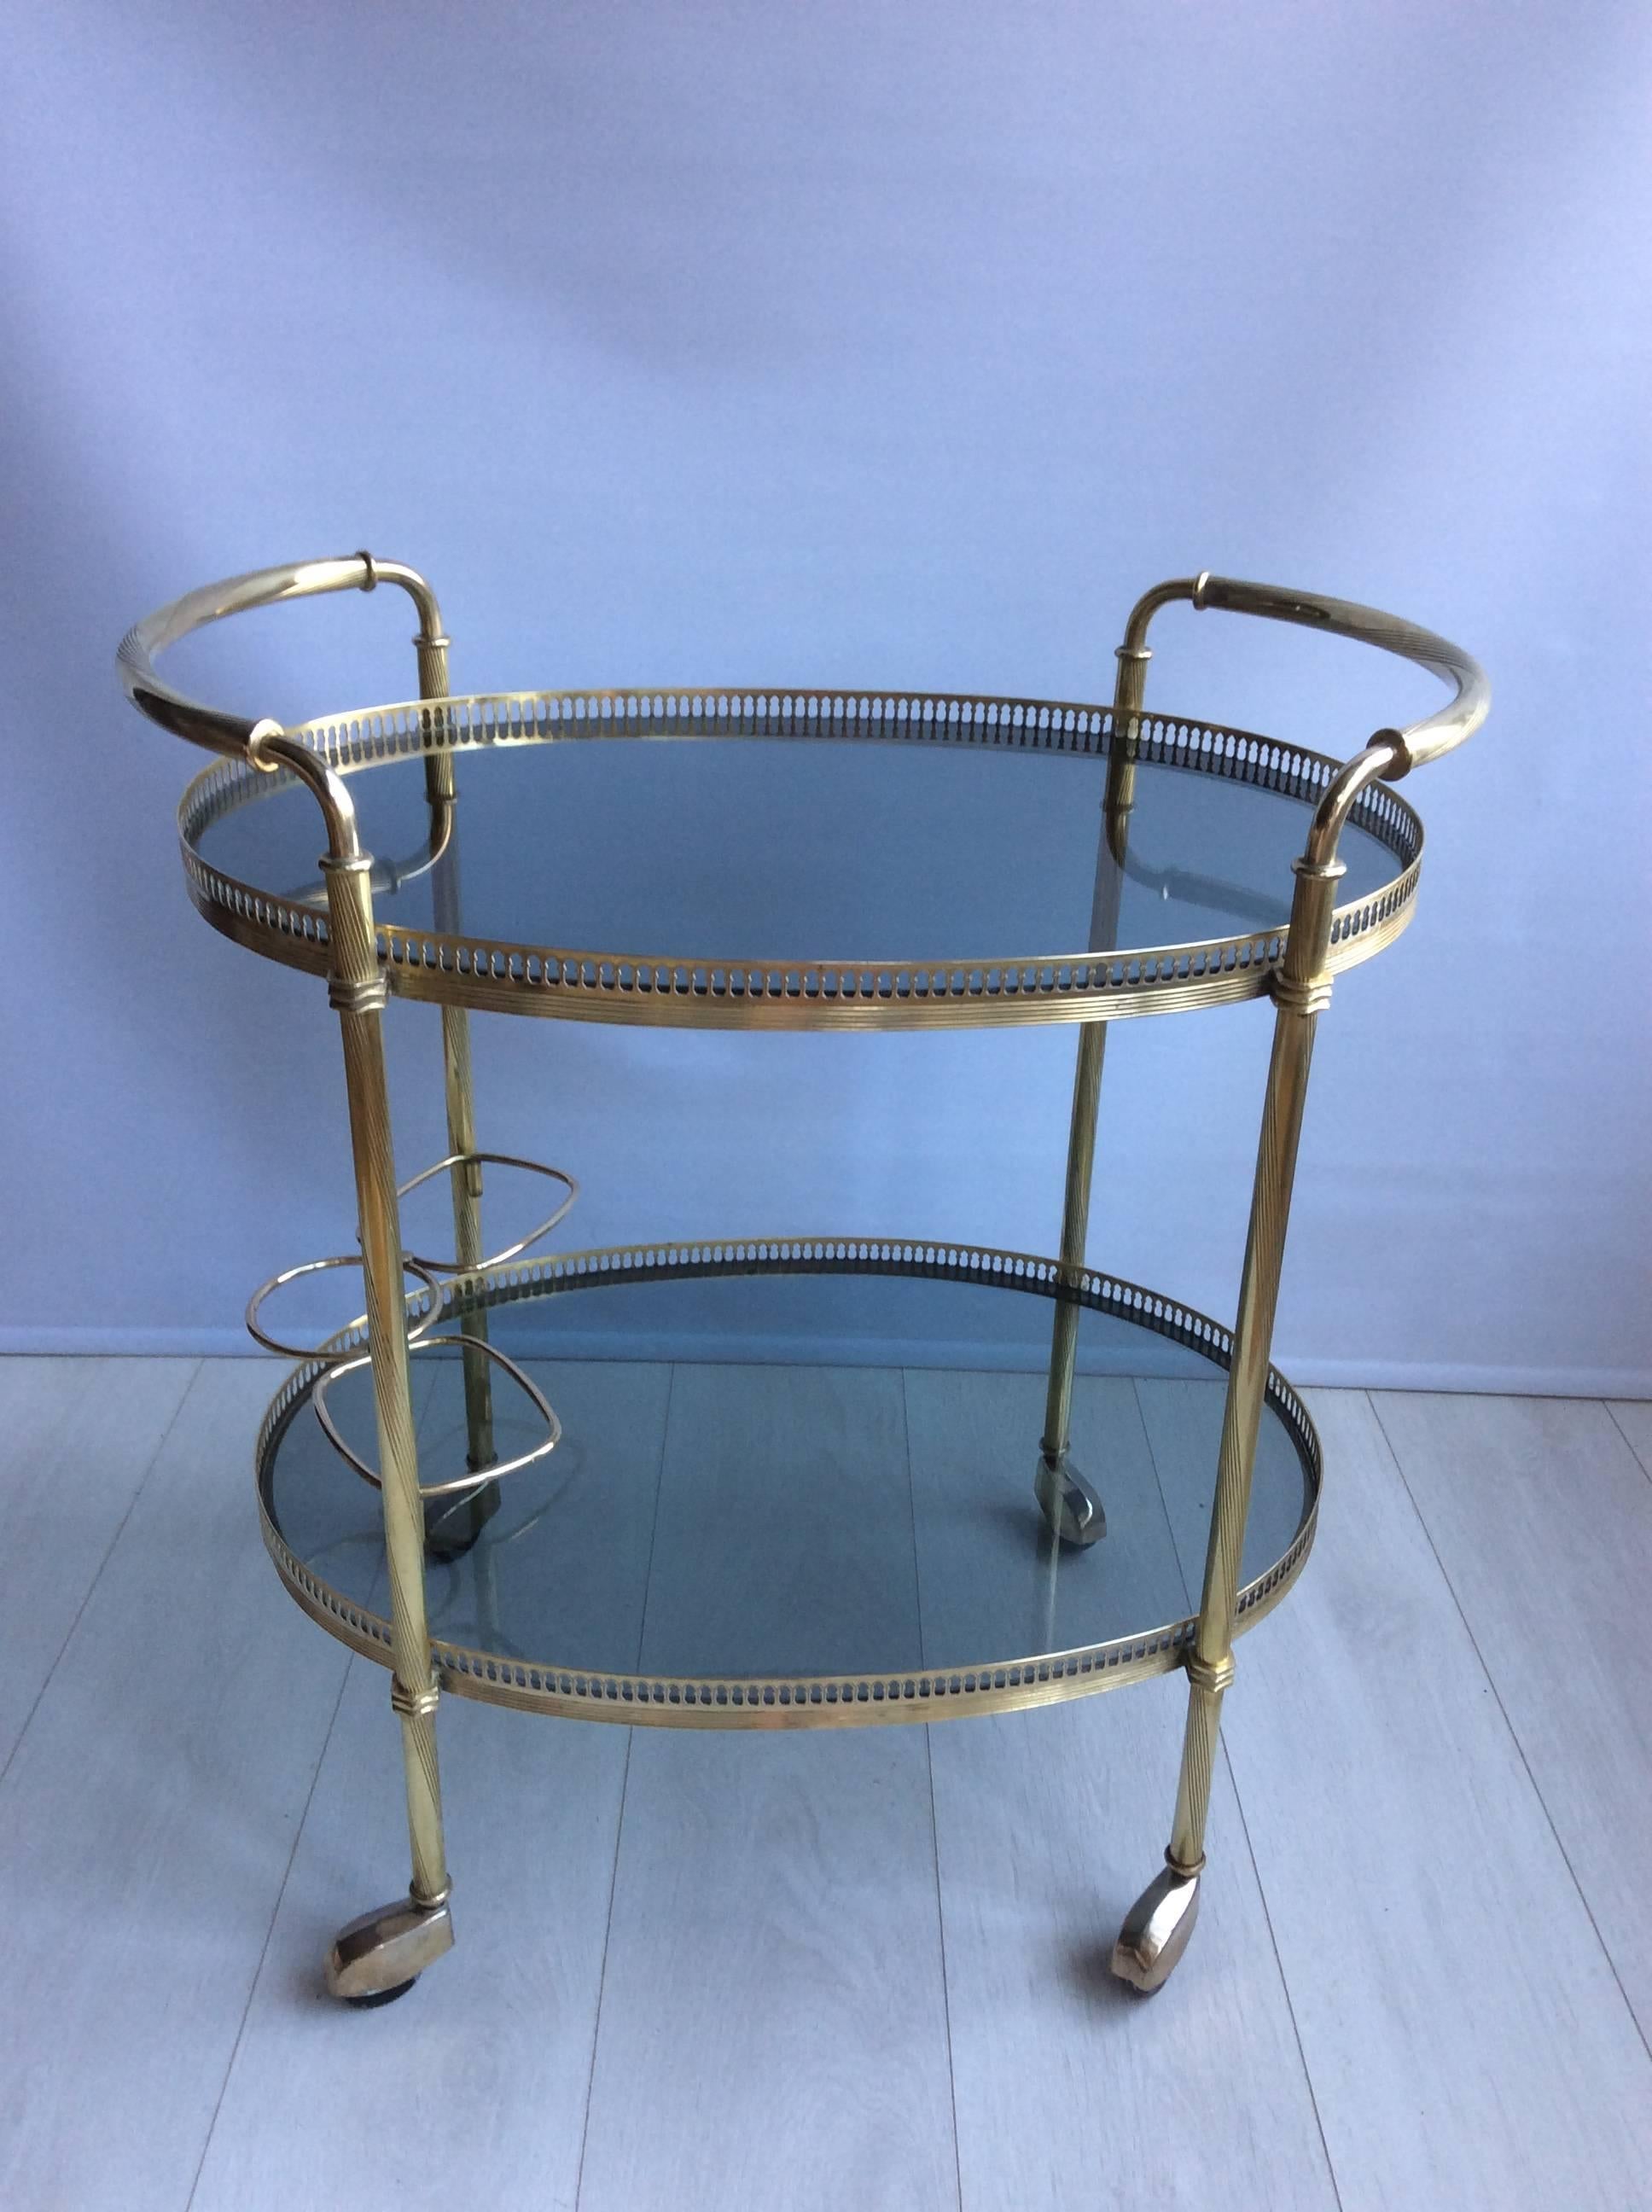 Lovely detailing to this vintage French drinks trolley, circa 1970.

Smoked glass shelves and bottle holder to lower tier

Top tray measures 63.5cm wide, 45cm deep with glass 61.5cm tall.
Overall 67cm wide, 45cm deep and 71.5cm tall.